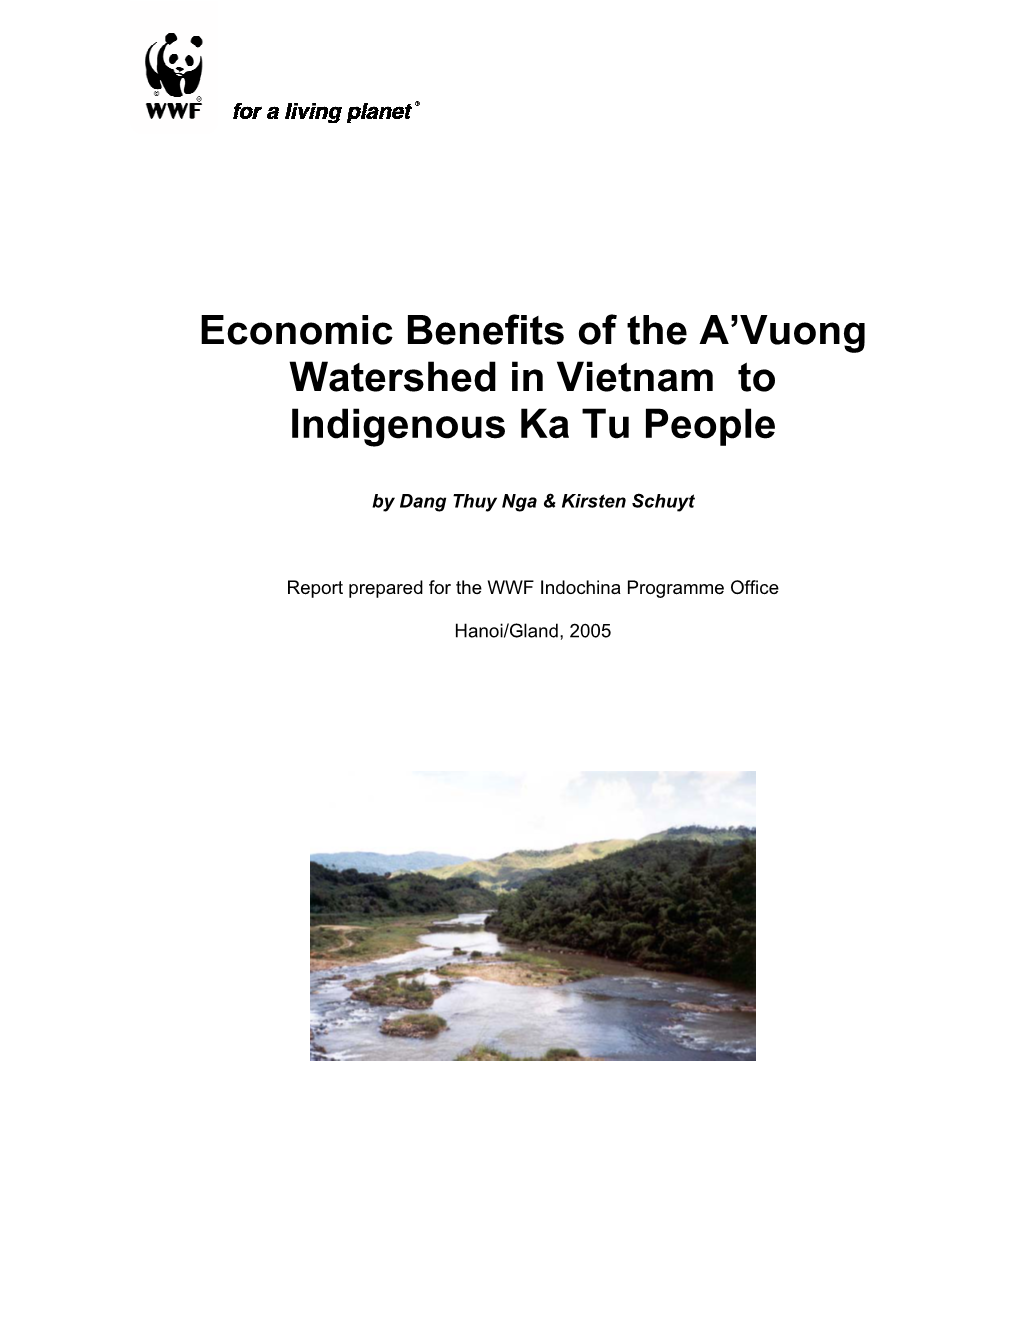 Economic Benefits of the A'vuong Watershed in Vietnam To